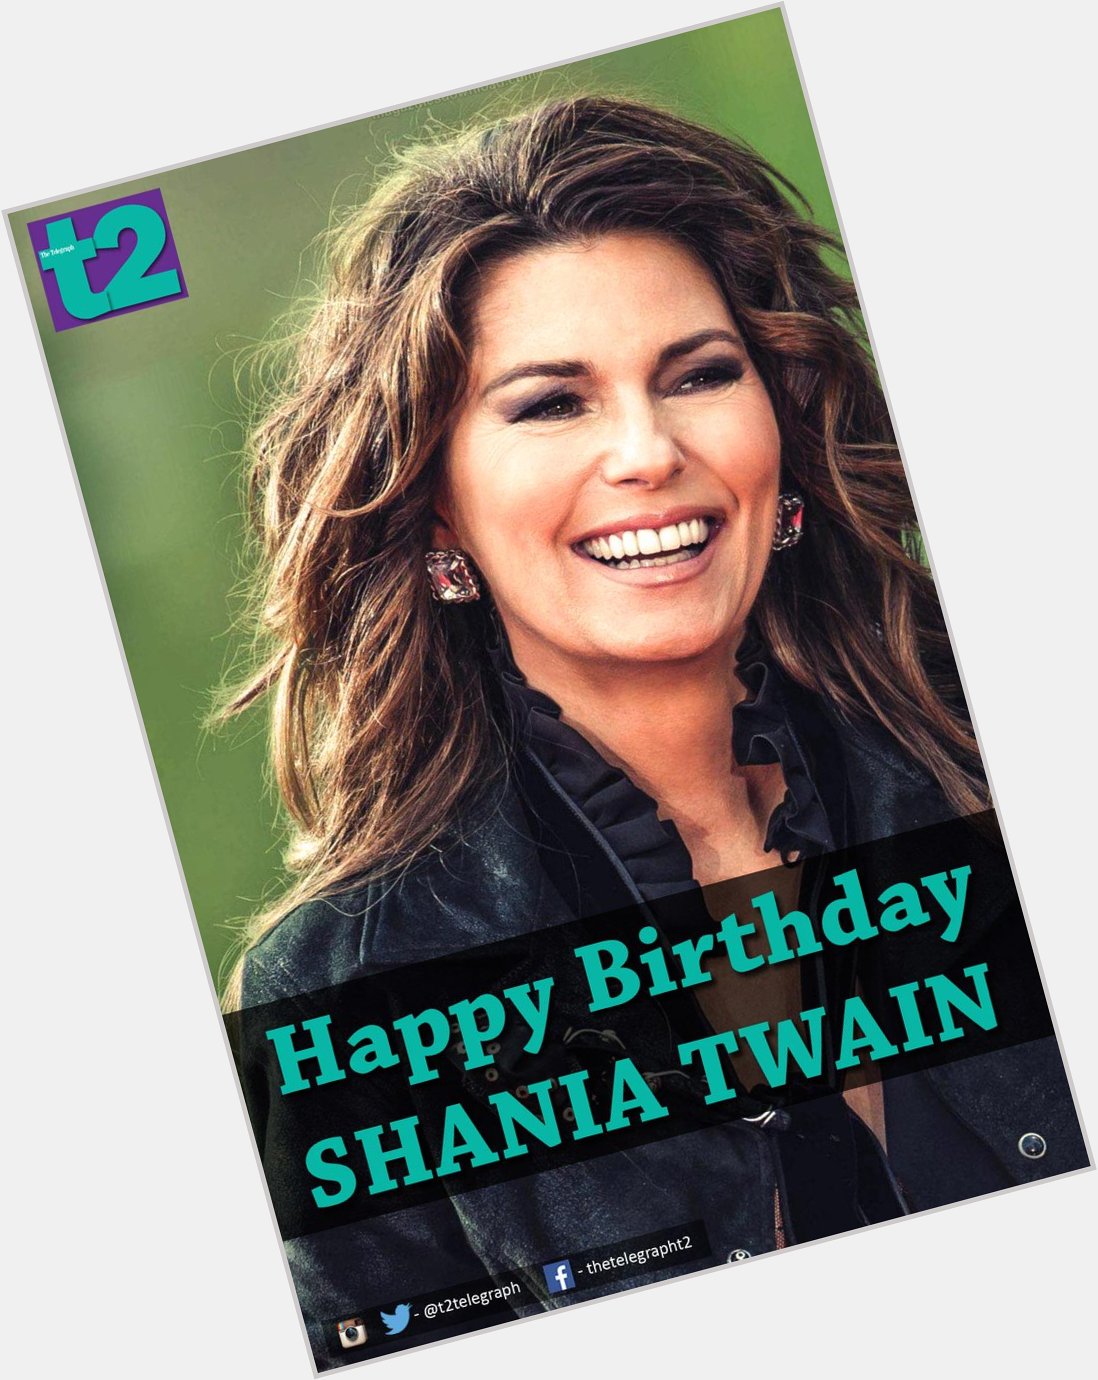 Happy birthday ! Which is your fave Shania Twain track? 